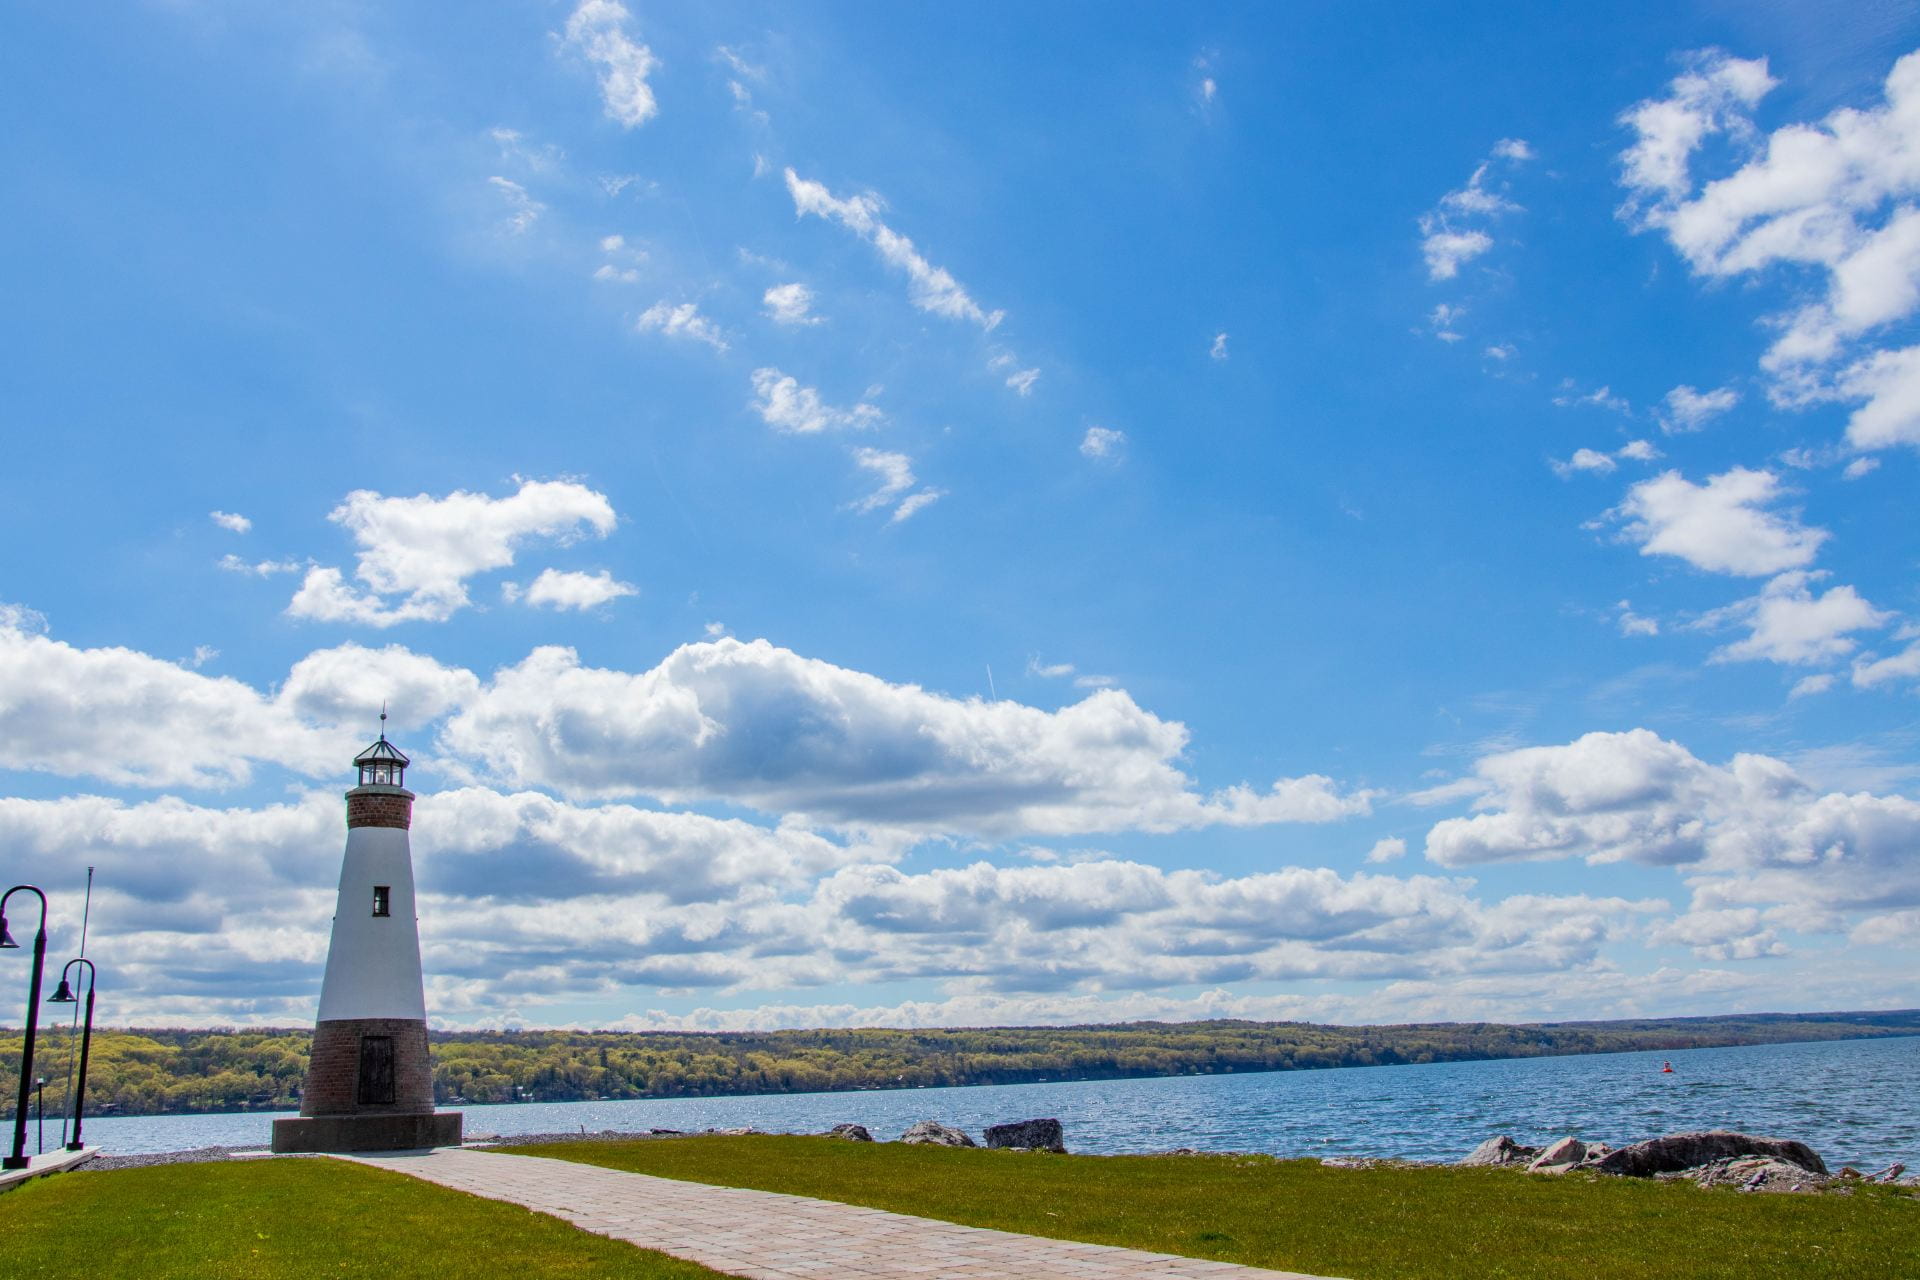 An image of the Myers Point Lighthouse in Lansing with a blue sky and clouds behind it.